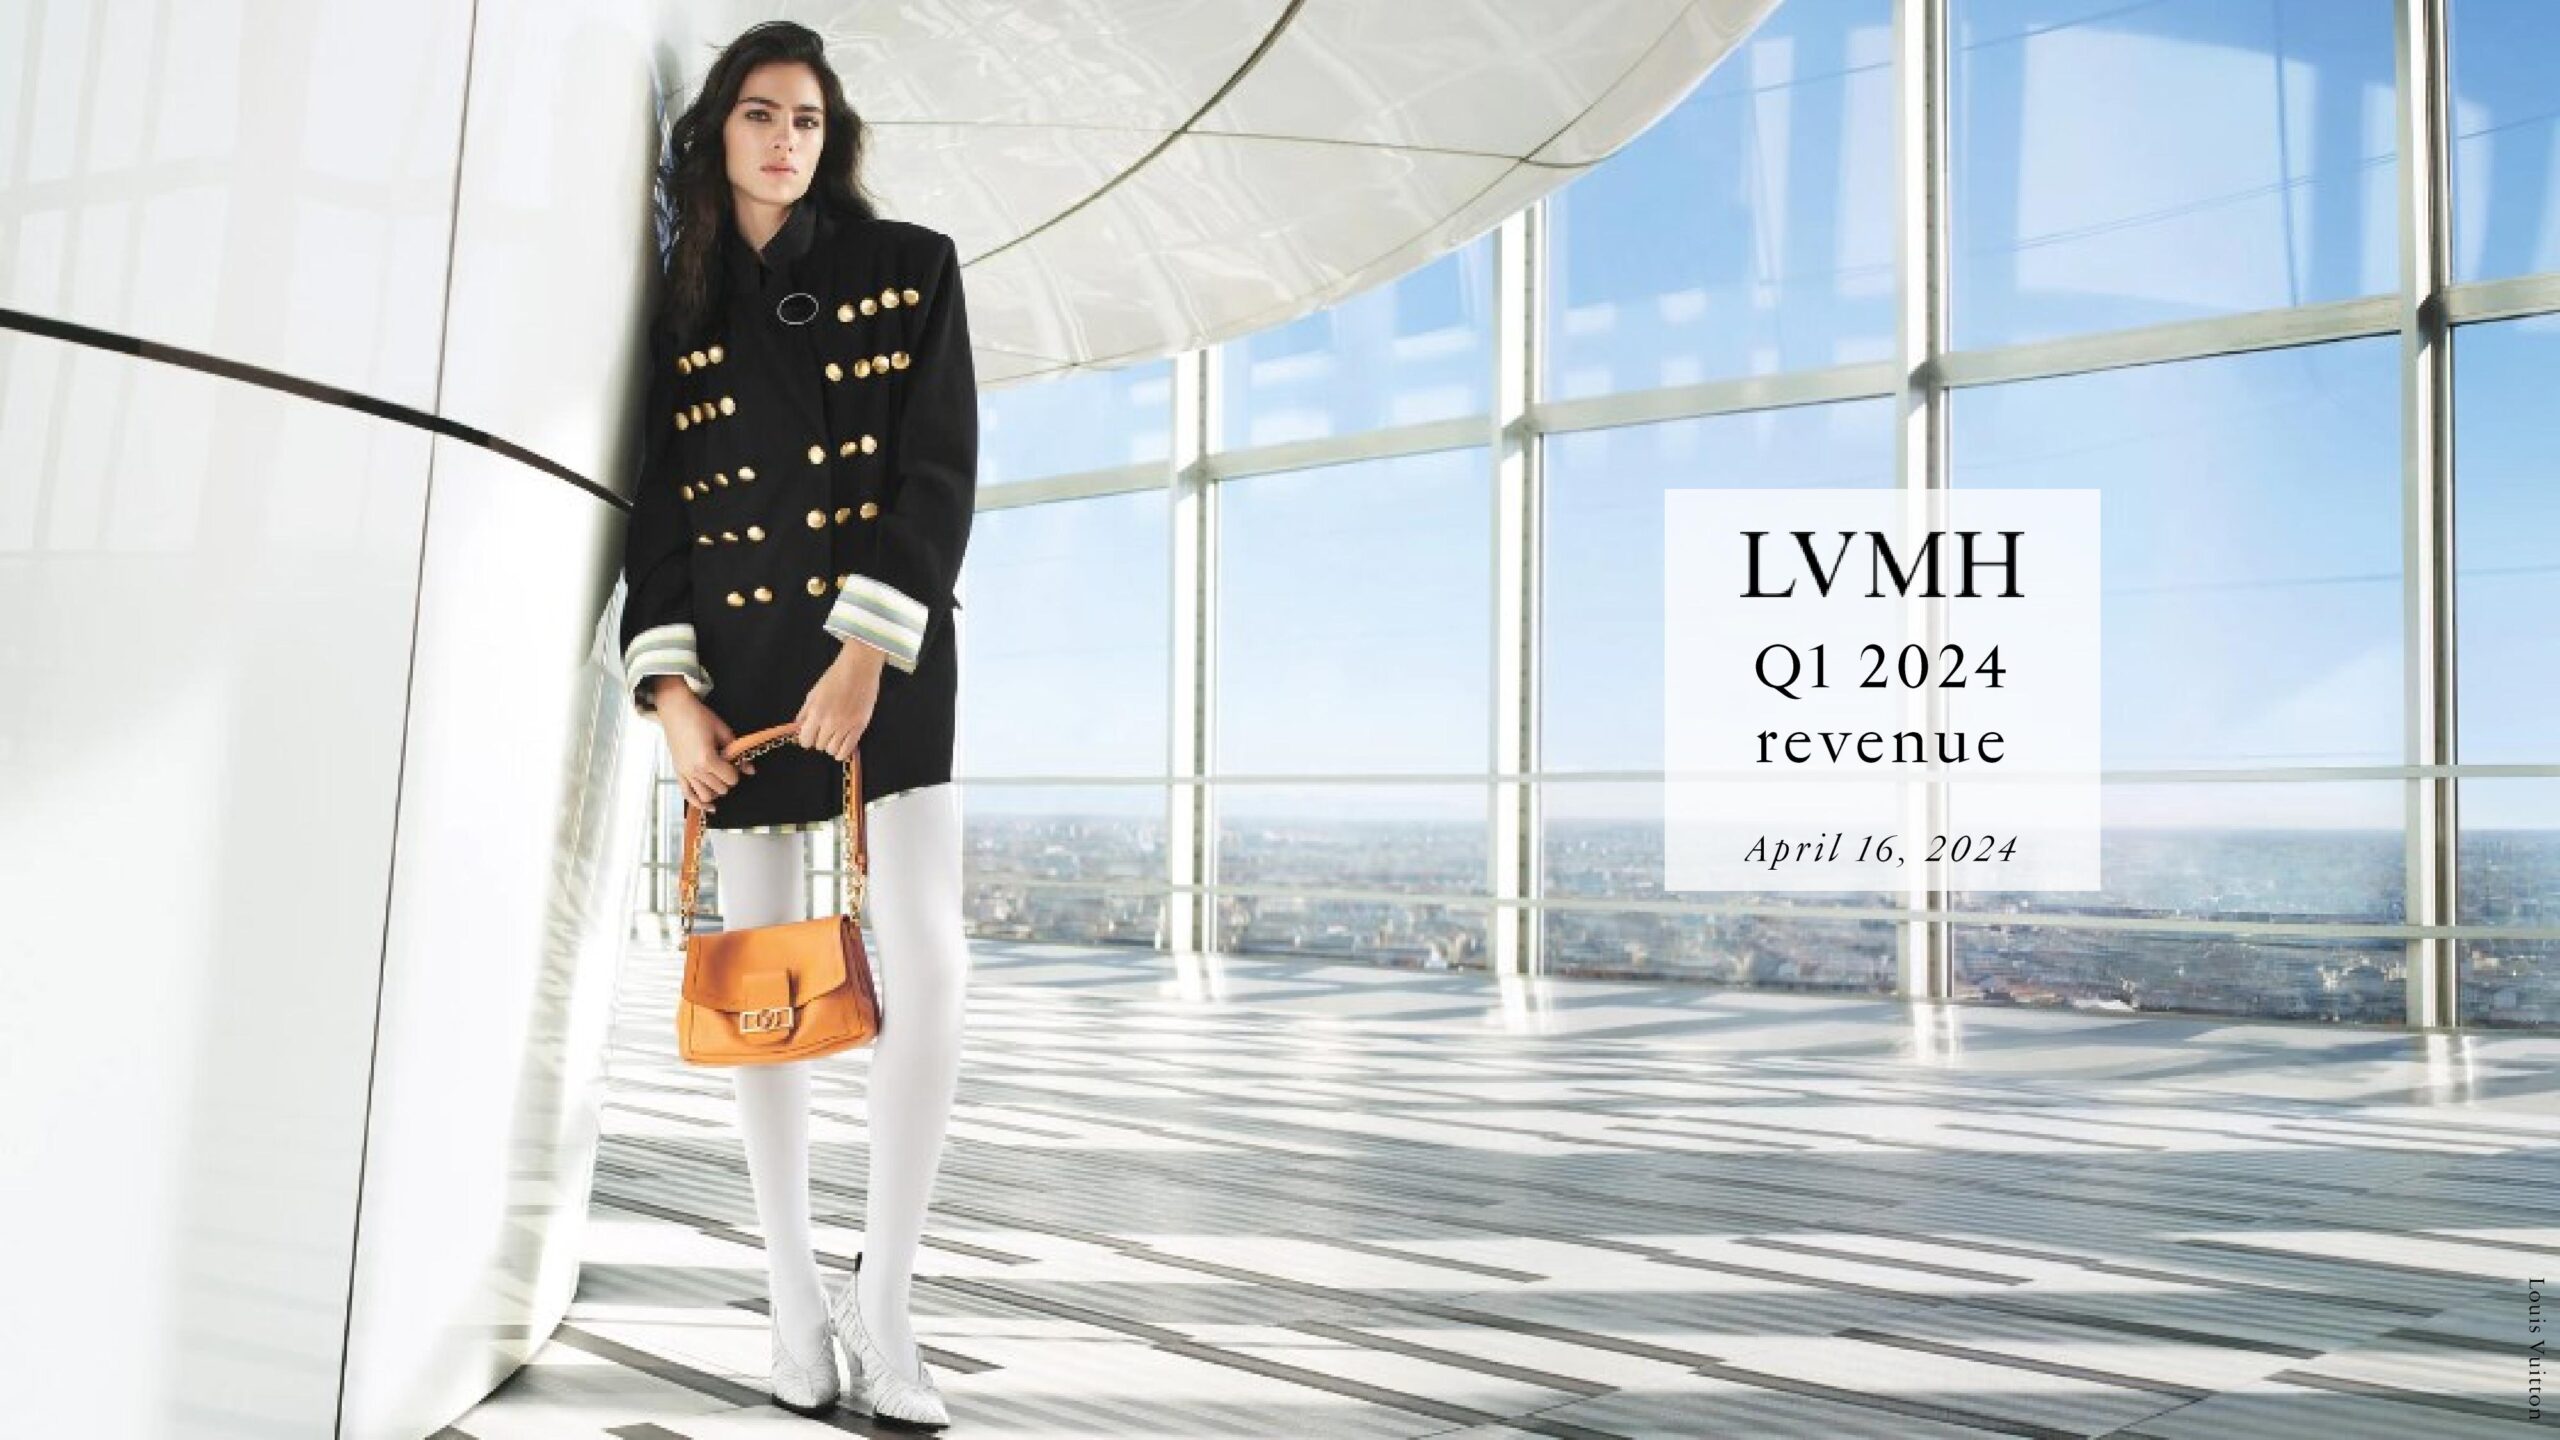 LVMH Group’s Q1 Organic Sales Growth of 3%, Boosted by Chinese Tourists in the Japanese Market by 32%